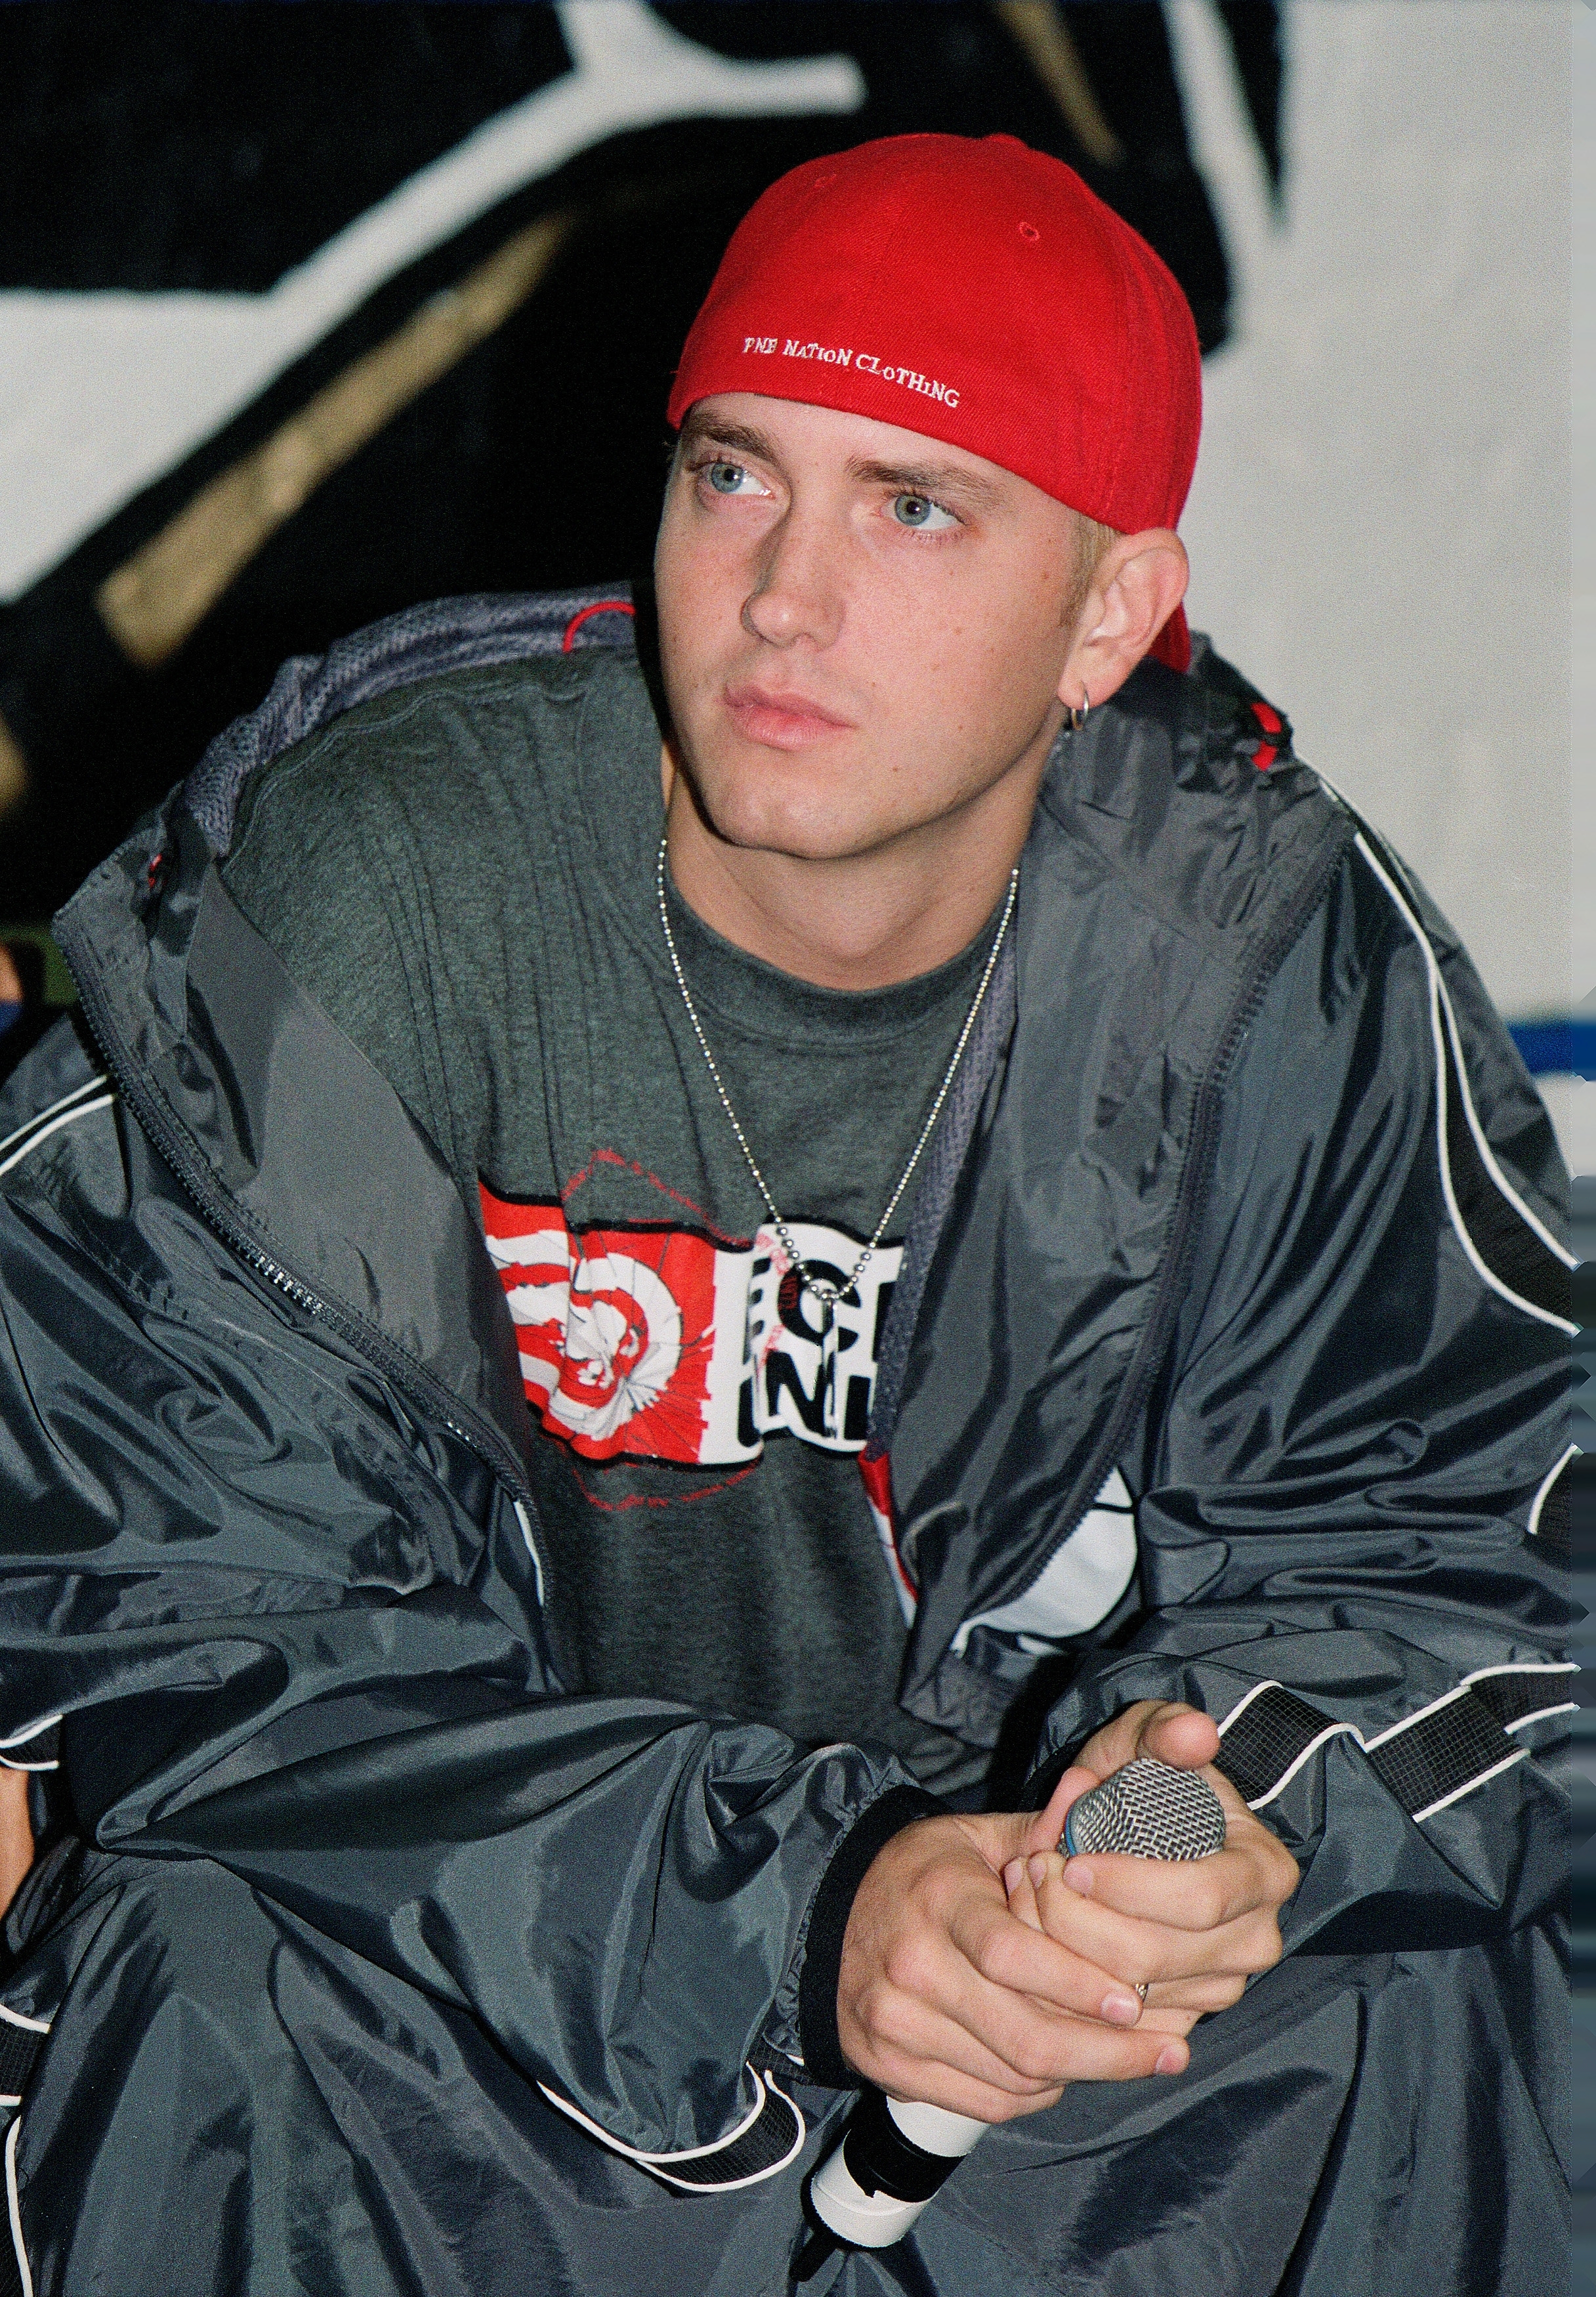 Eminem and Dr Dre Press Conference at Brixton Boxing Club, London, England 2000